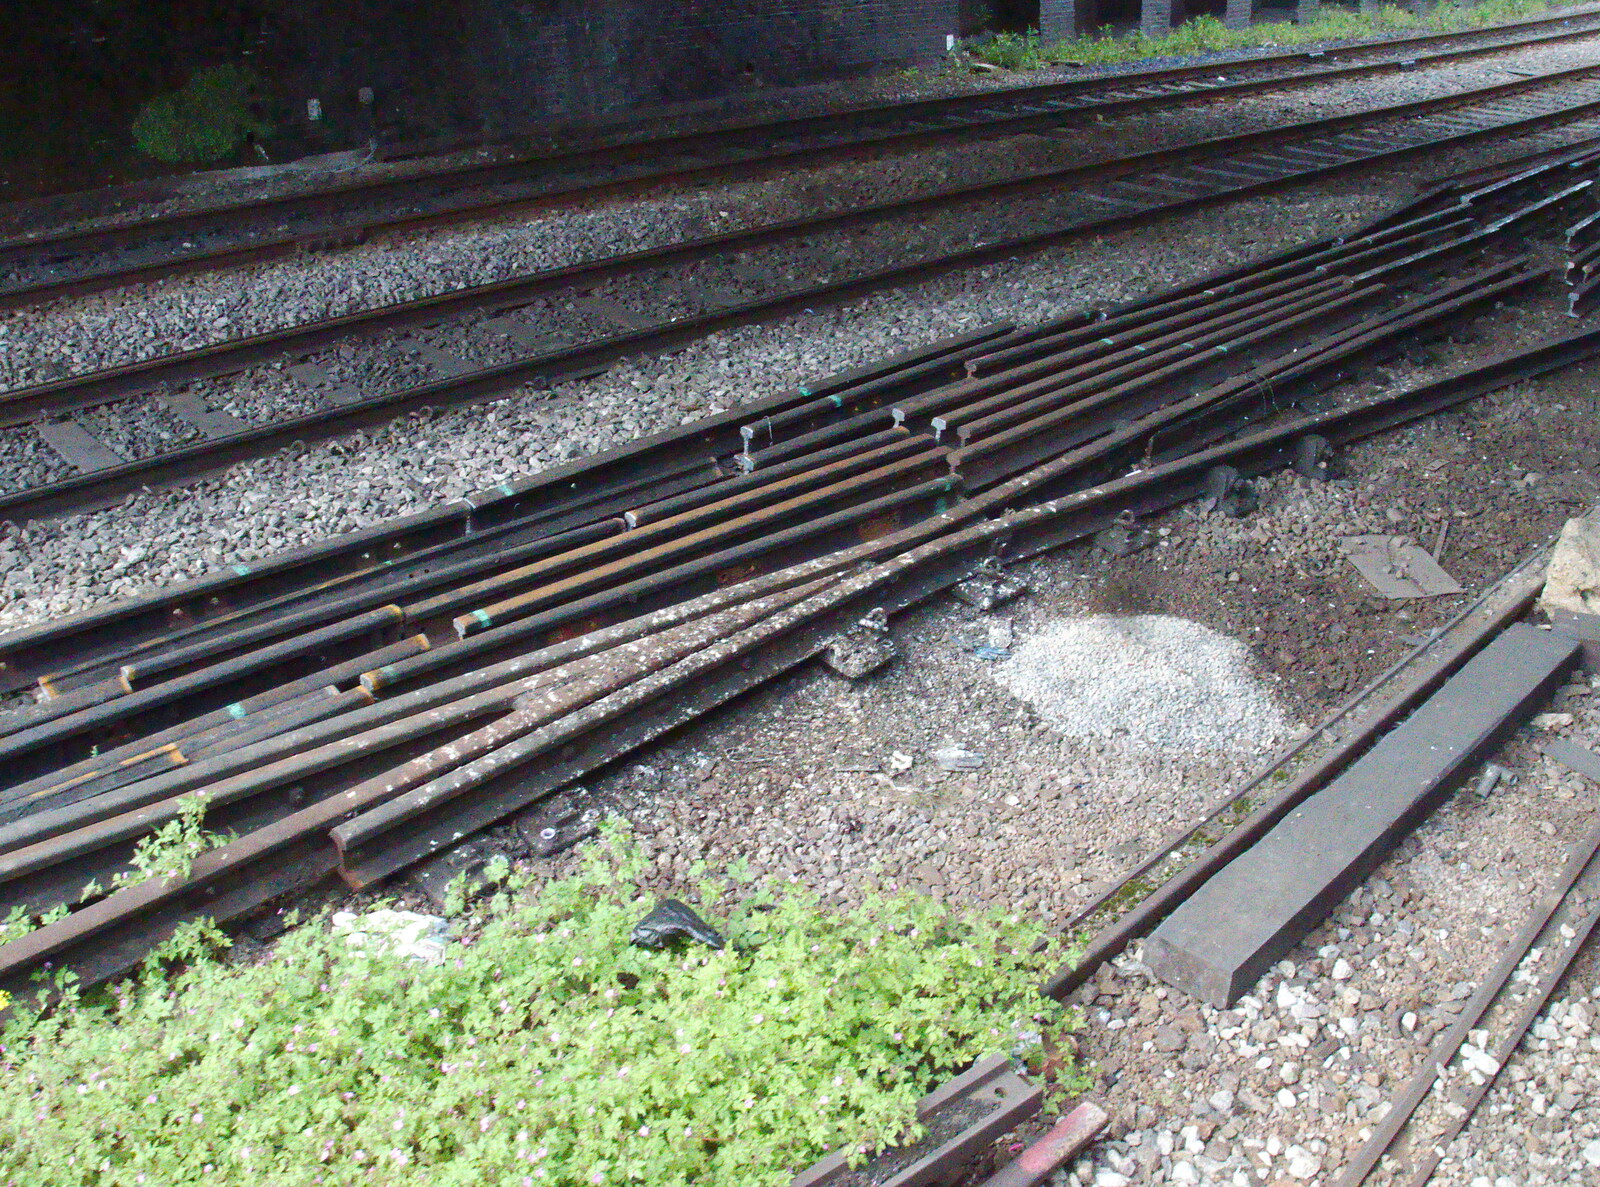 A pile of cut-up railway tracks from A May Miscellany, London - 8th May 2014